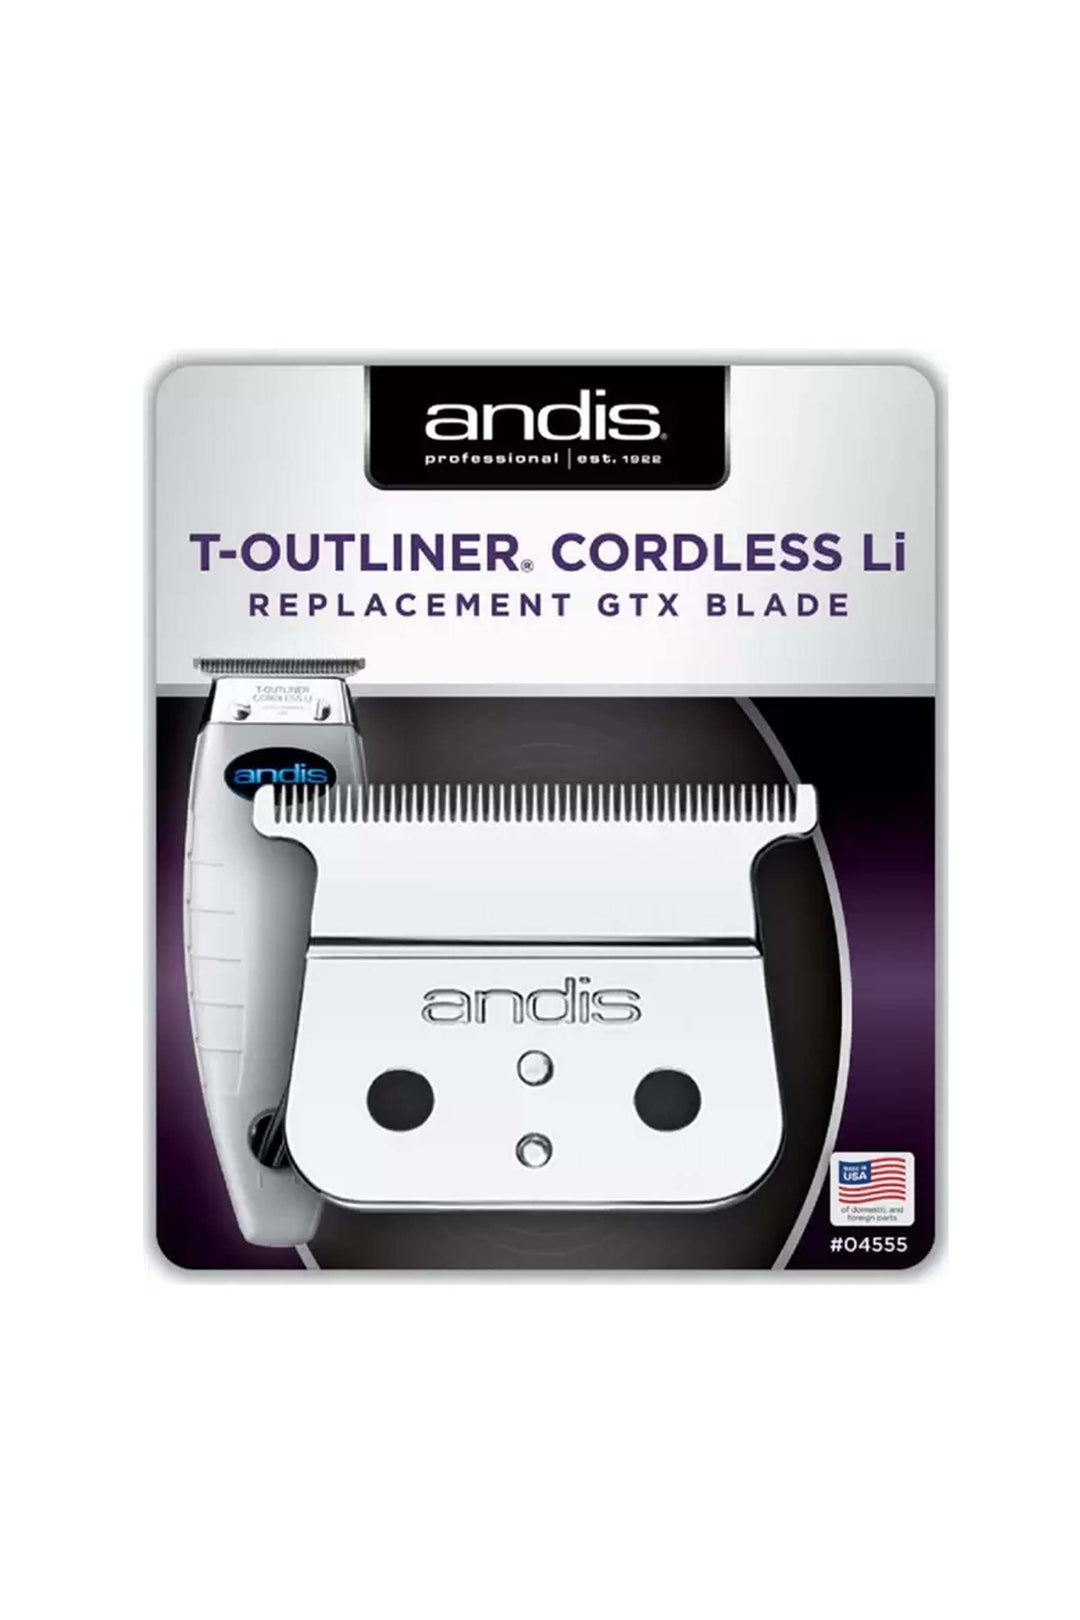 ANDIS T-OUTLINER CORDLESS LI REPLACEMENT GTX BLADE